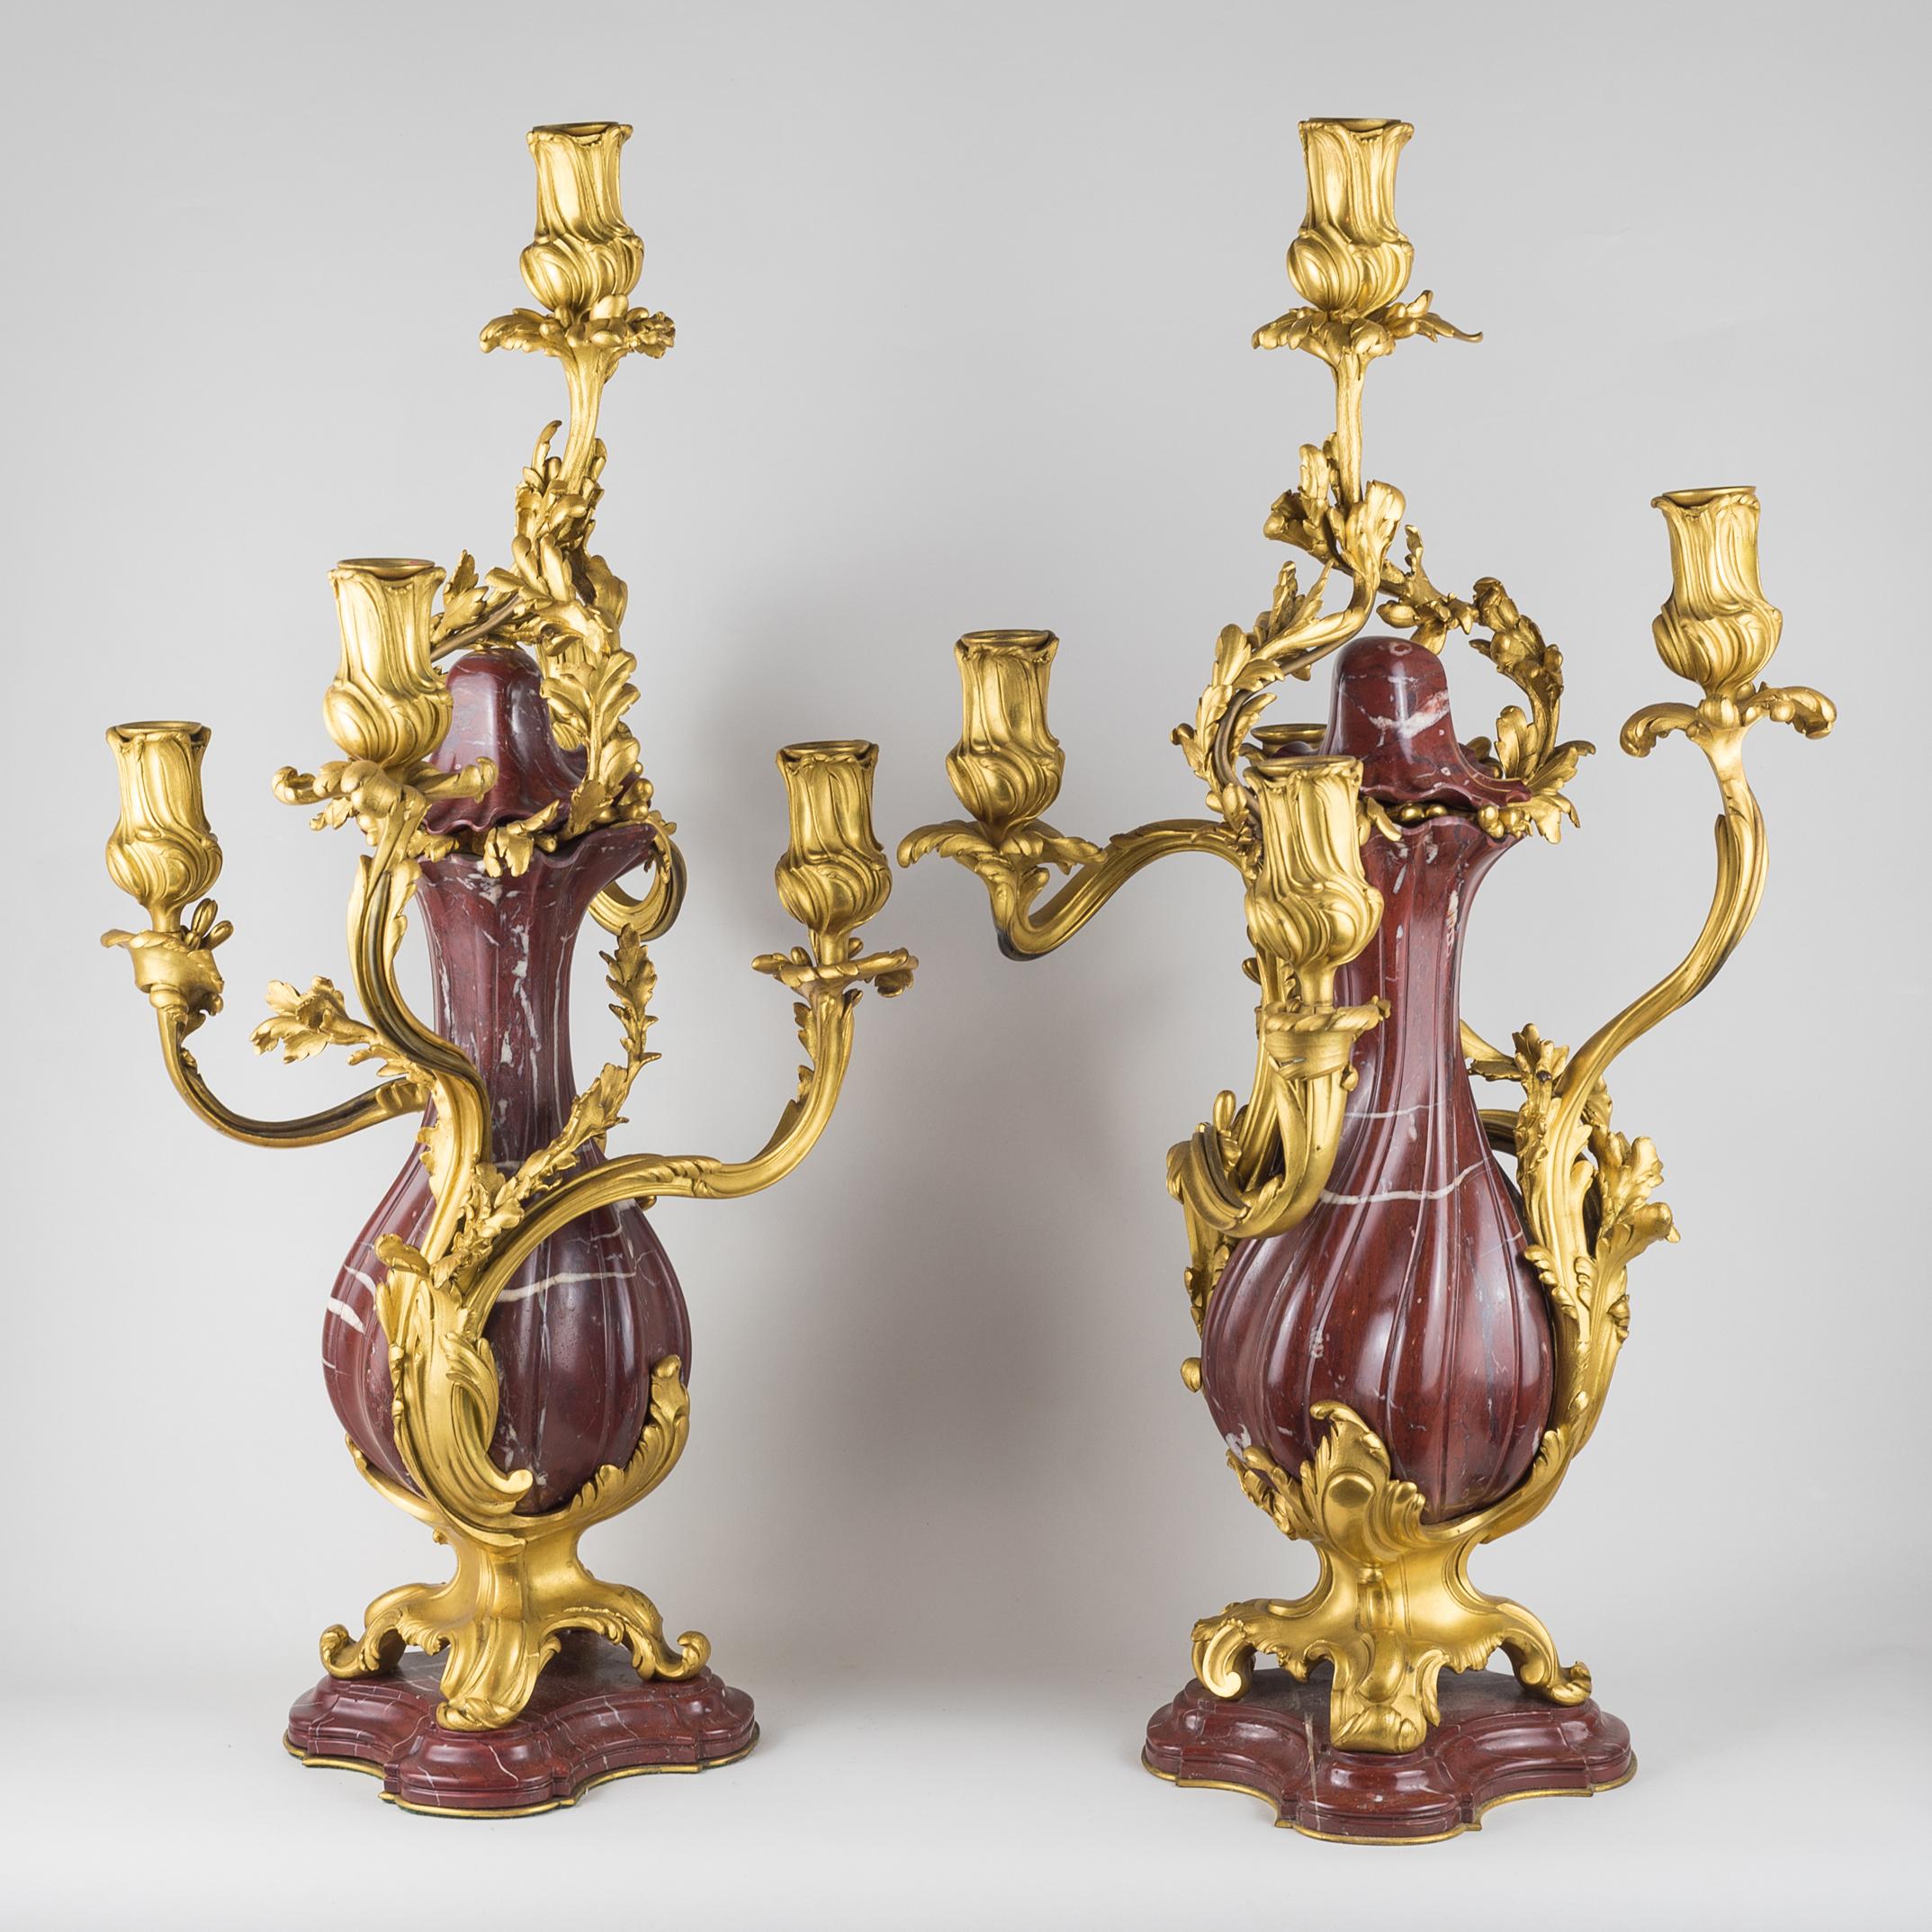 The Pair of Louis XV Style E. Colin & Cie Paris foundry gilt bronze and rouge marble five light candelabras, of baluster form entwined by foliate ornament issuing the scroll arms, raised on shaped feet and conforming plinth, impressed E. Colin & Cie